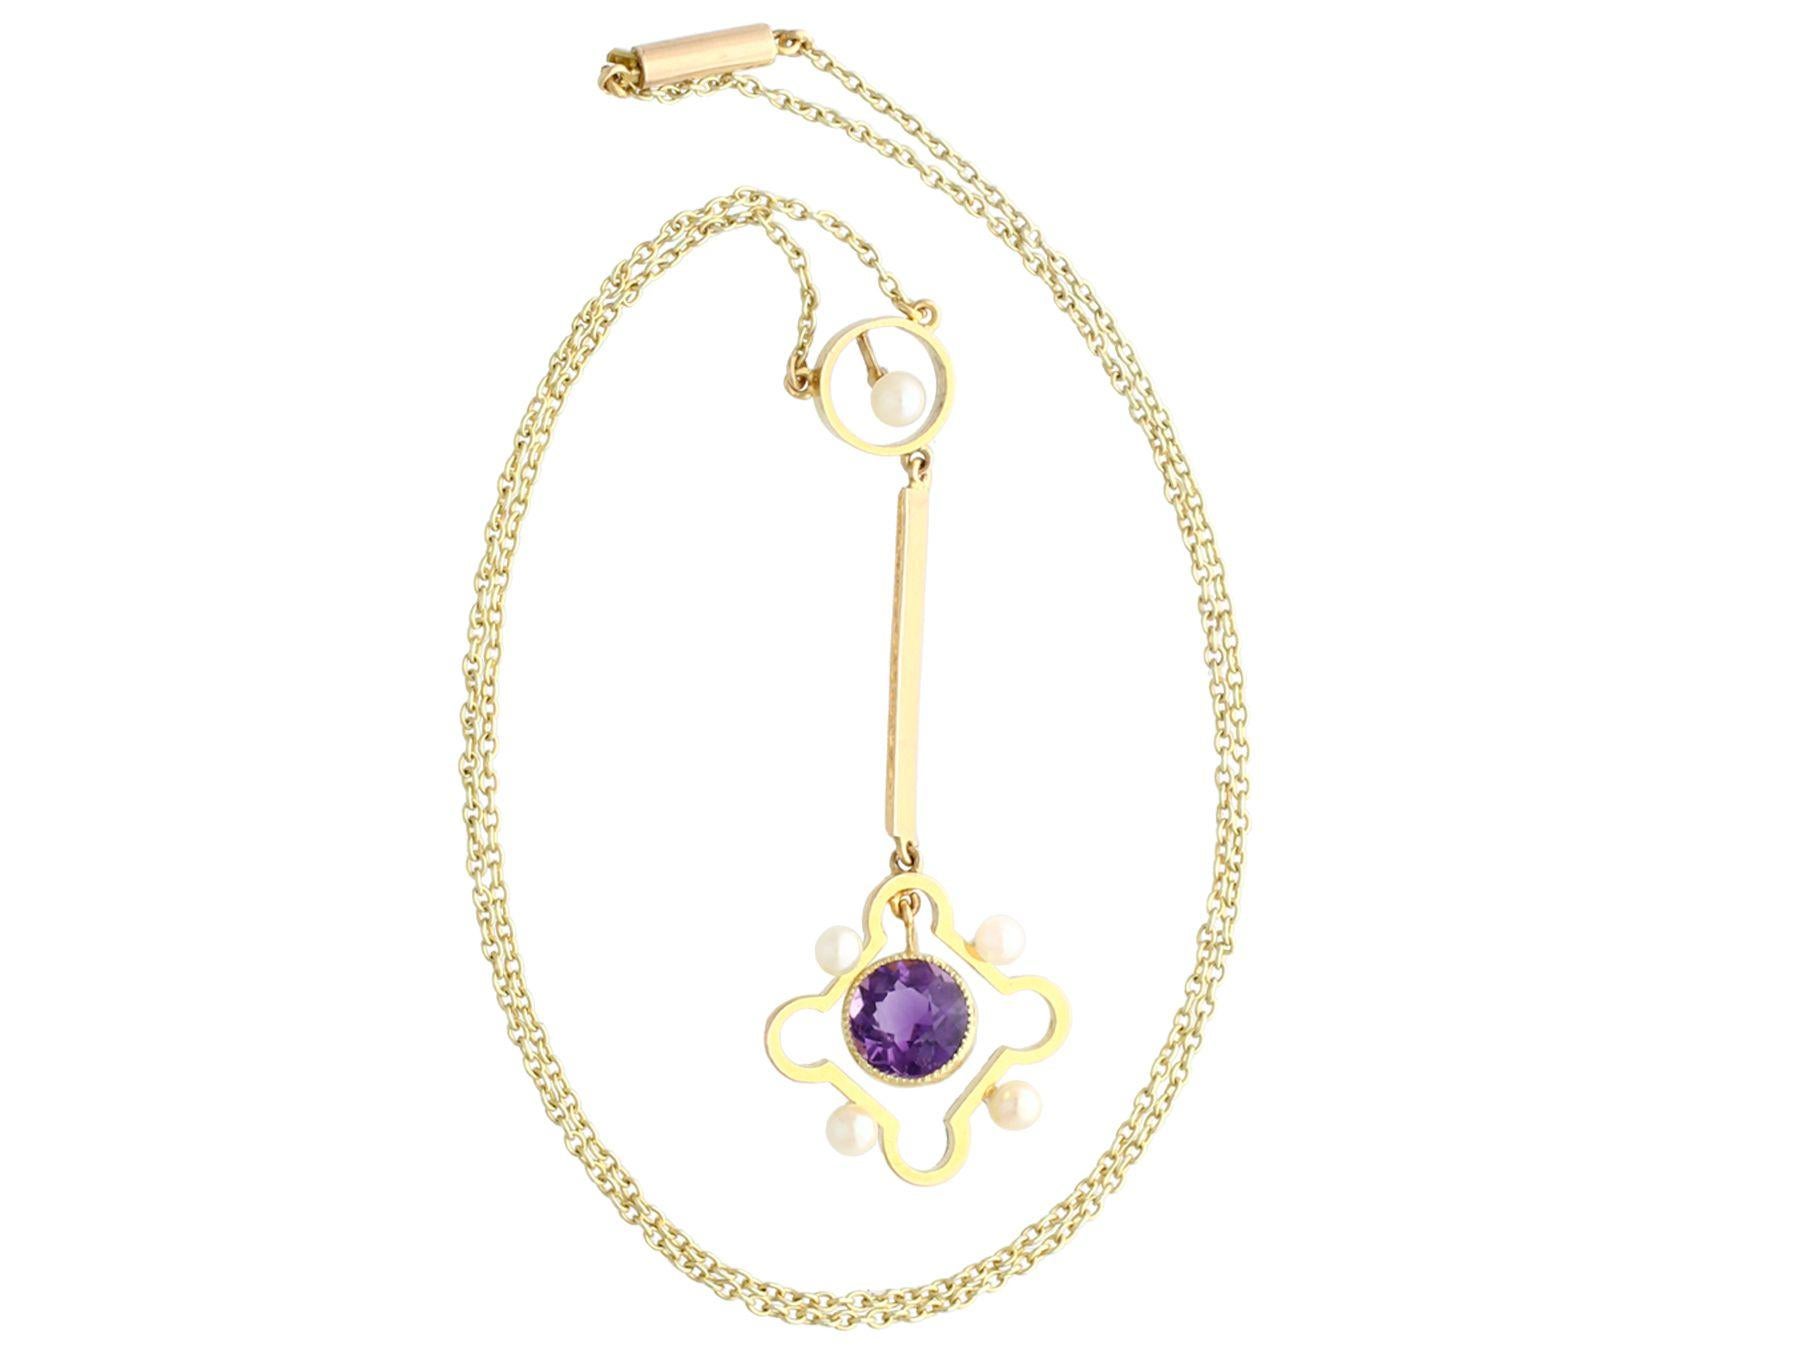 An exceptional, fine and impressive 1.31 carat amethyst and pearl, 15k yellow gold Necklace; part of our diverse antique jewelry and estate jewelry collections.

This exceptional, fine and impressive amethyst and pearl pendant has been crafted in